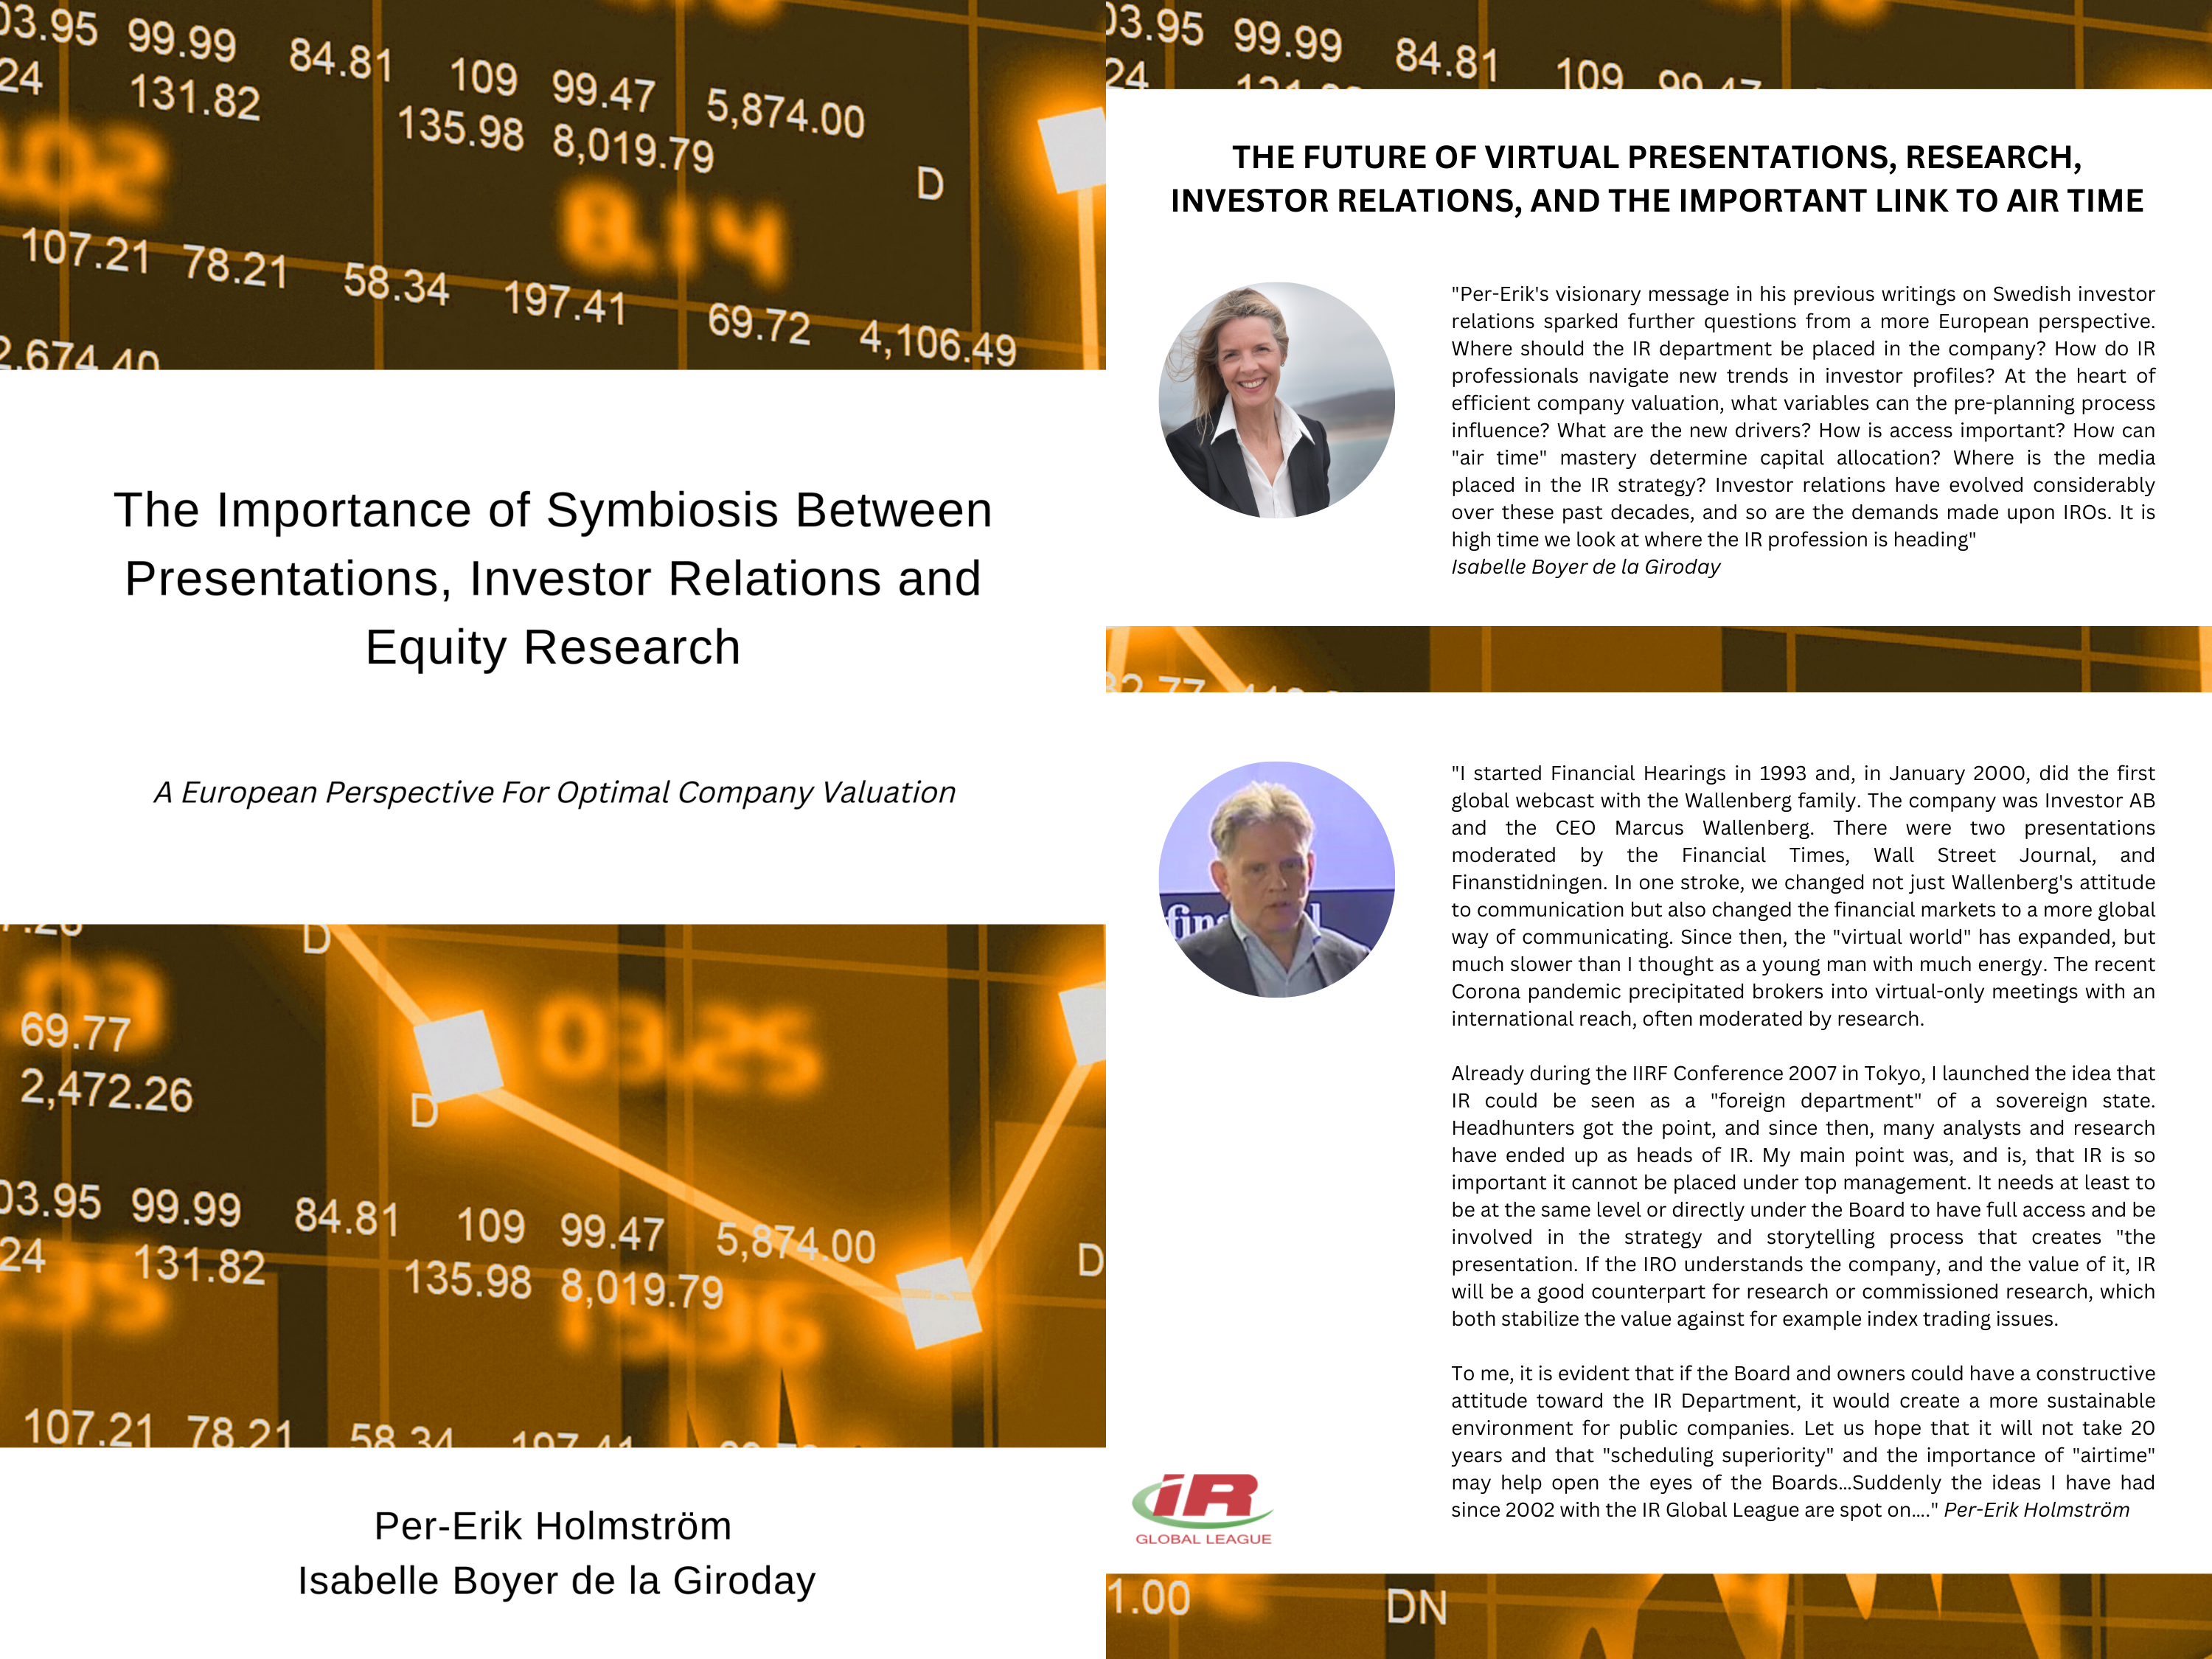 The Importance of Symbioses Between Presentations, Investor Relations and Reserach